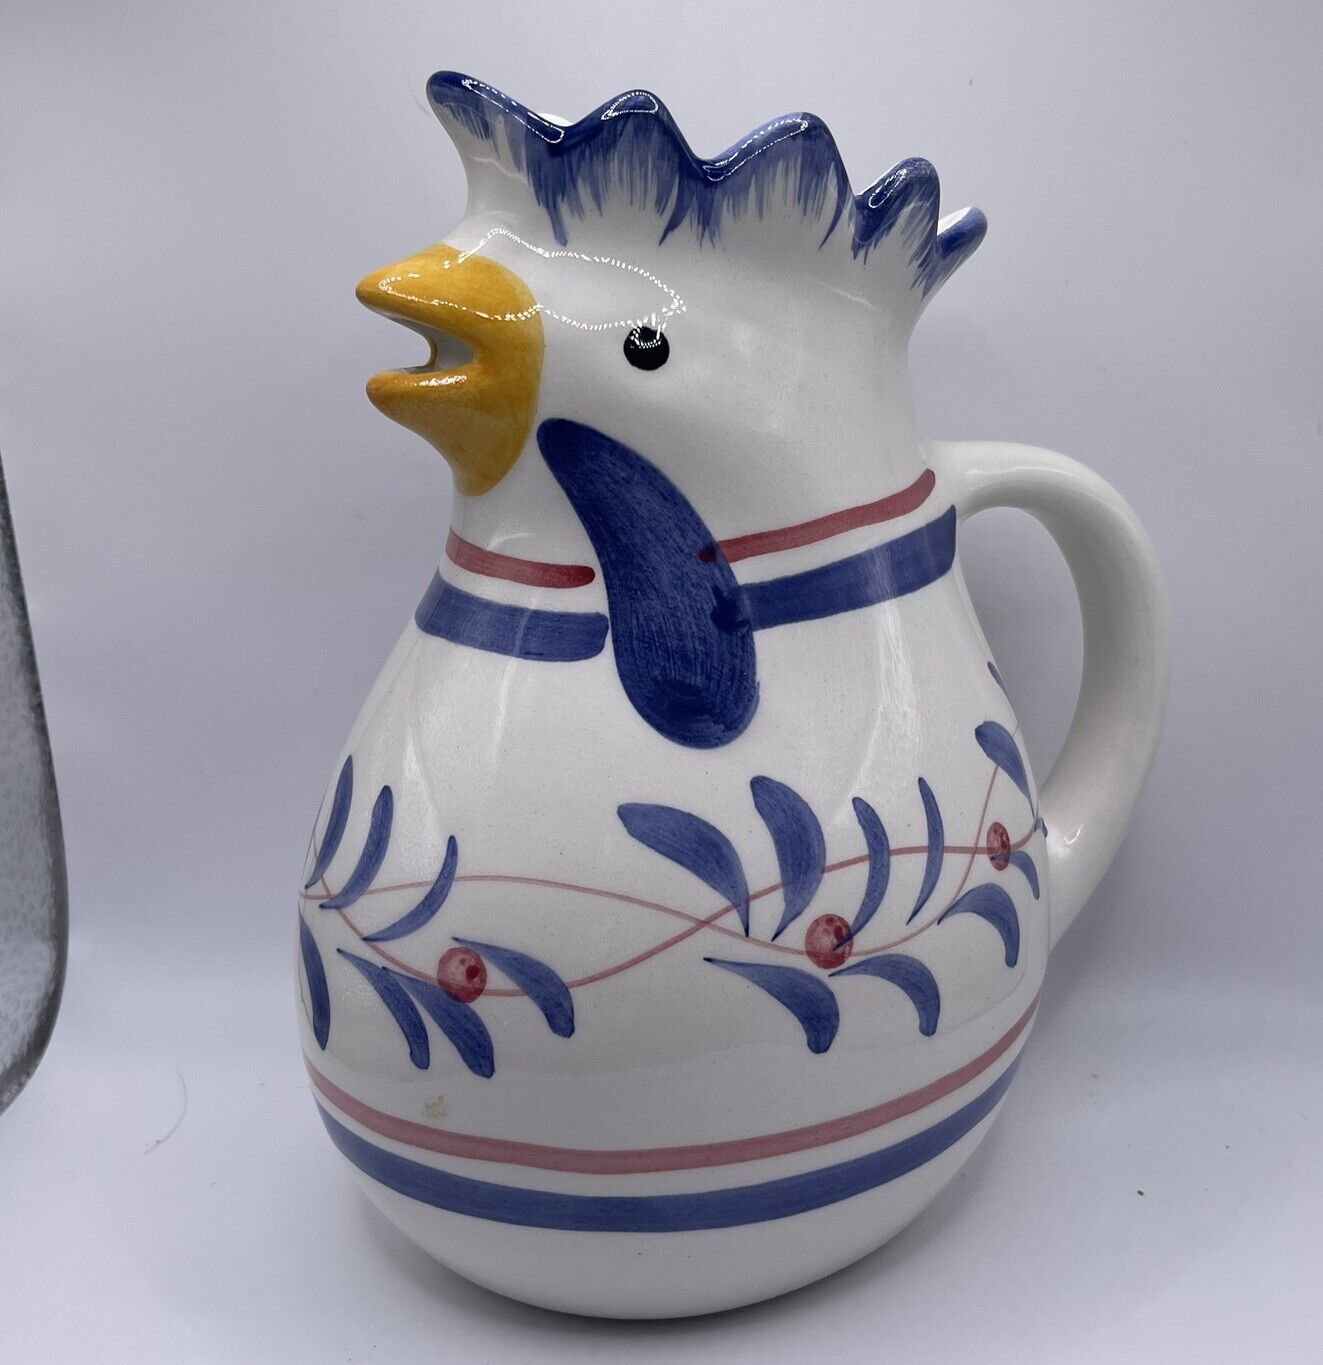 Italian Ceramic Chicken Pitcher Vase Made In Italy Hand Painted 8” White Blue